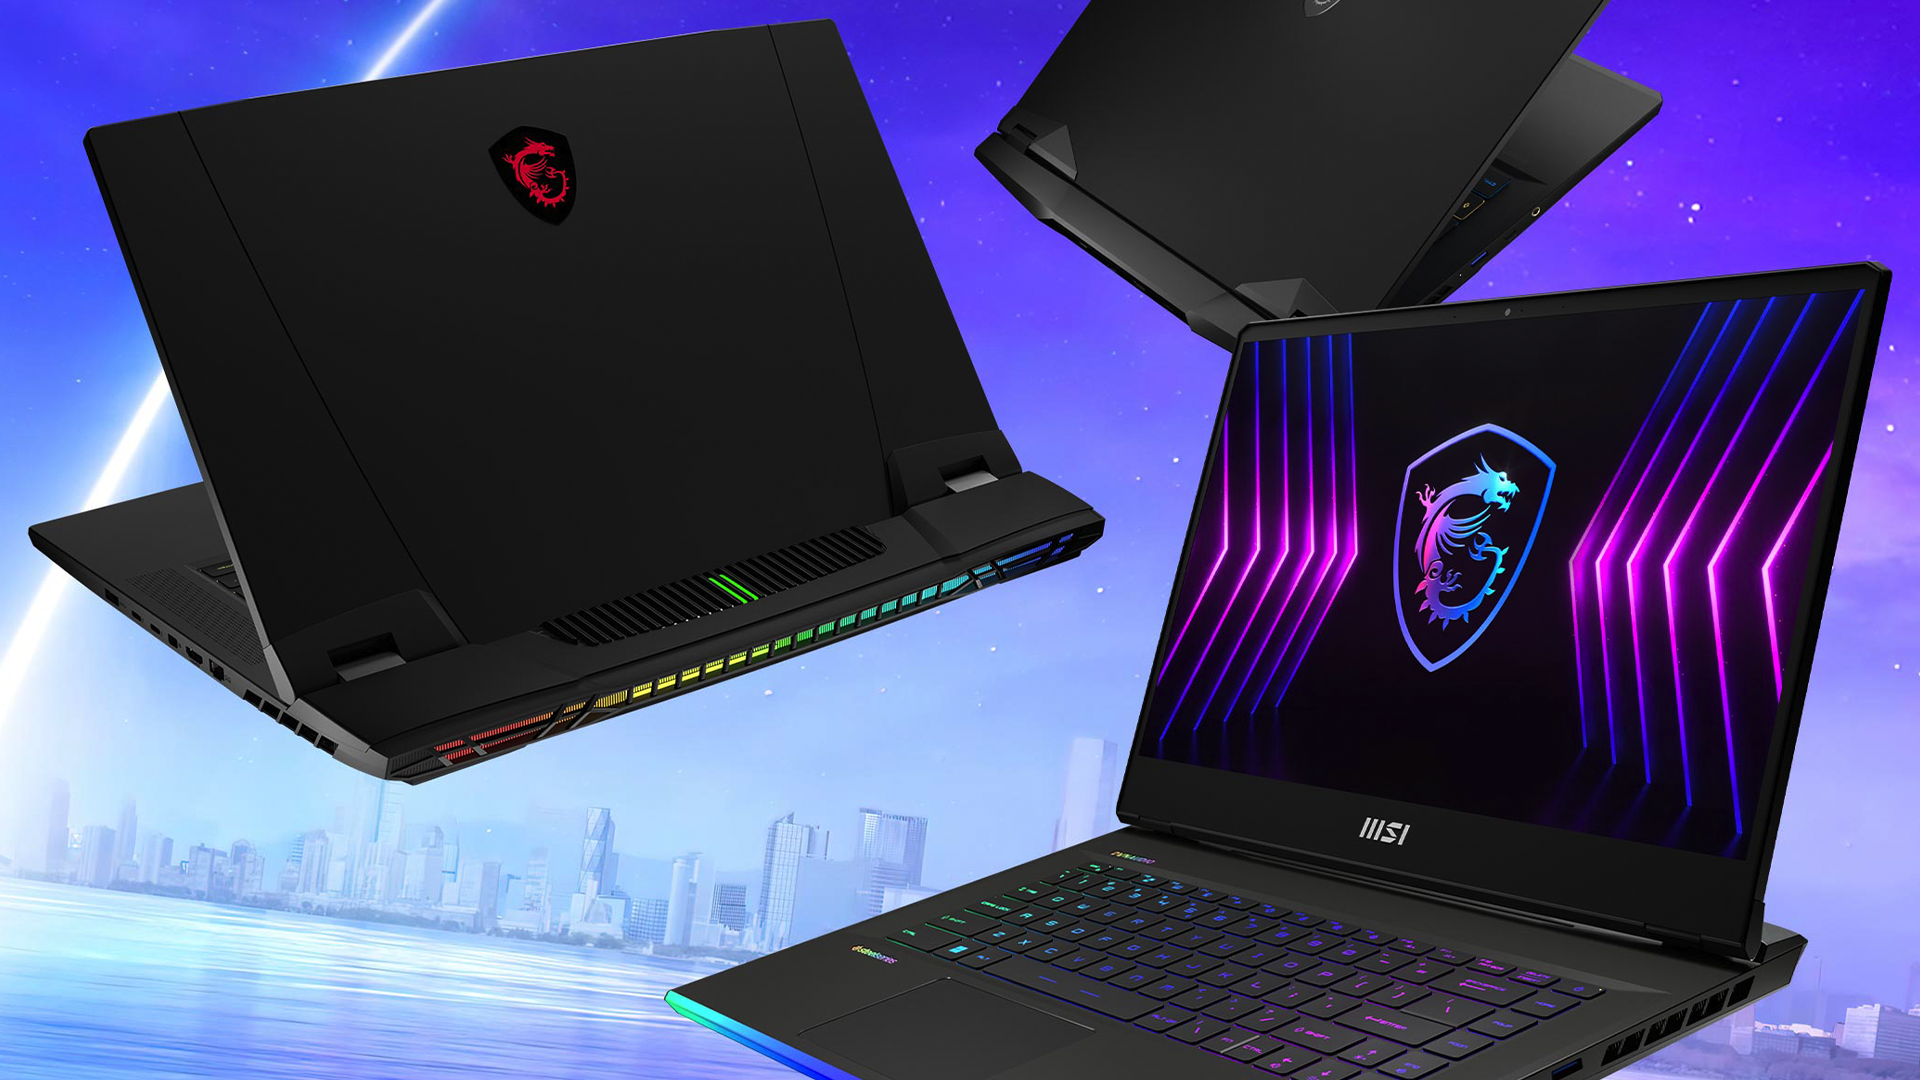 Should You Buy a Gaming Laptop?